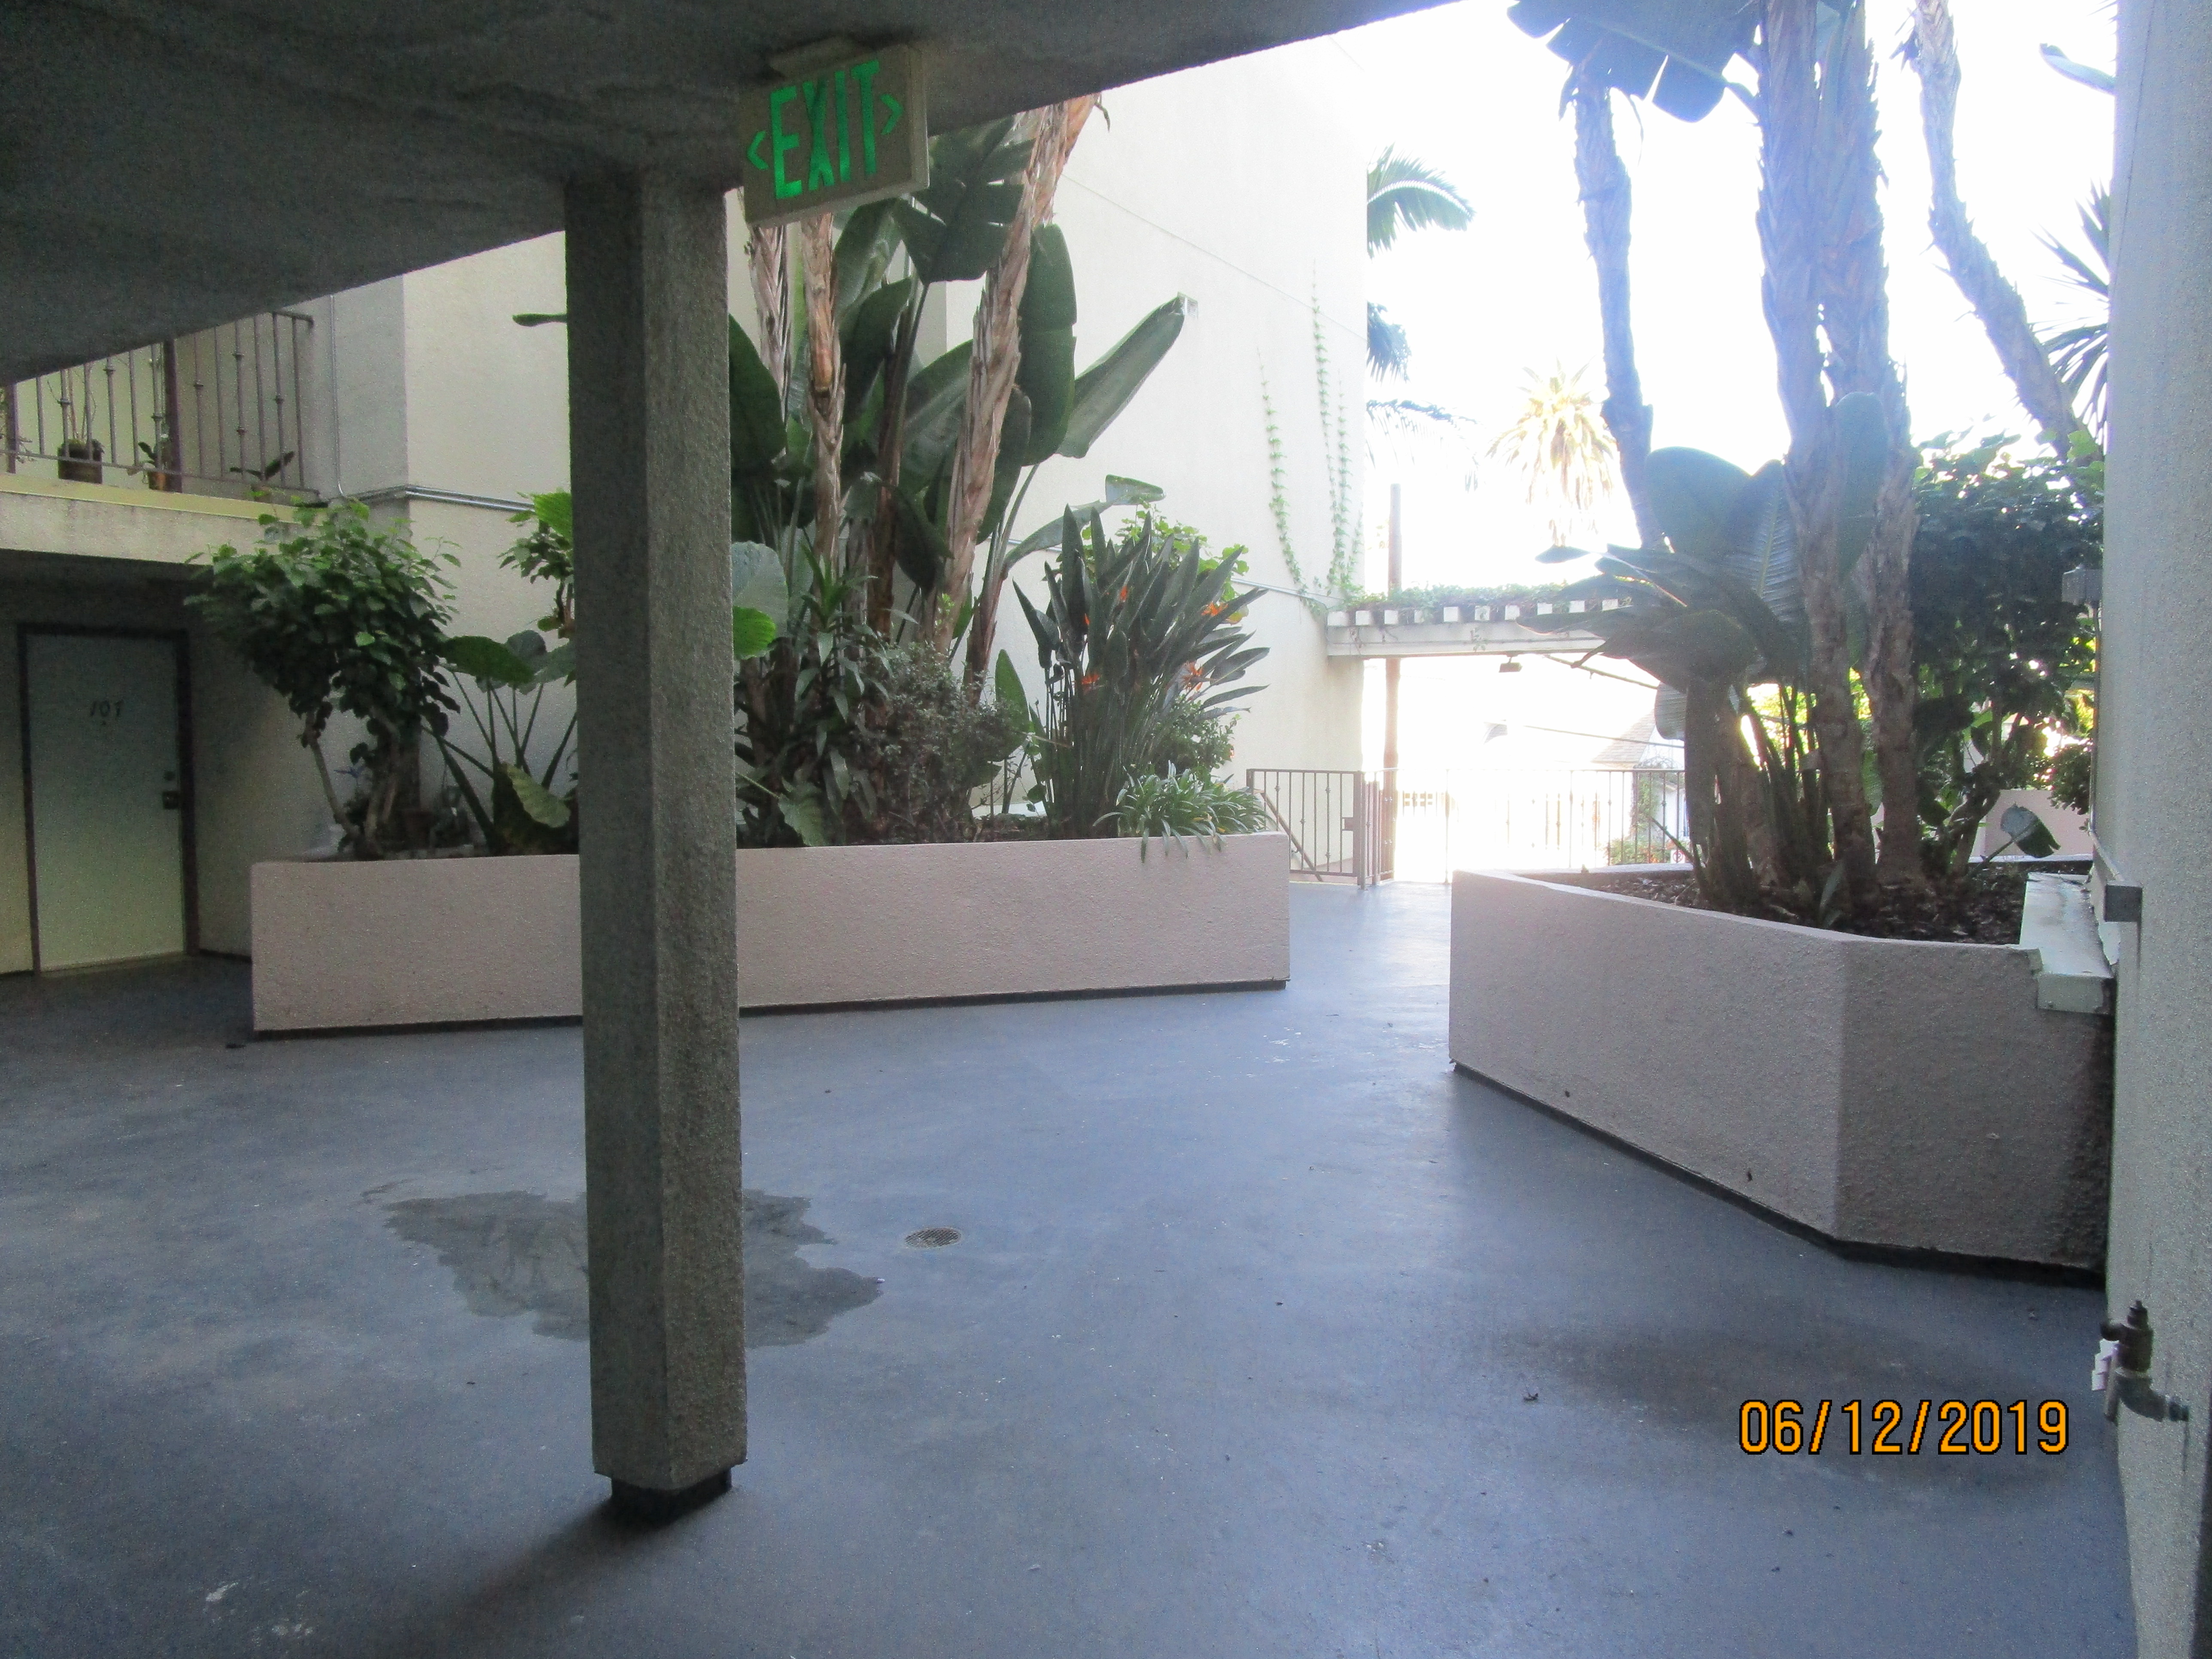 View of one side of the patio's concrete build-in planters.